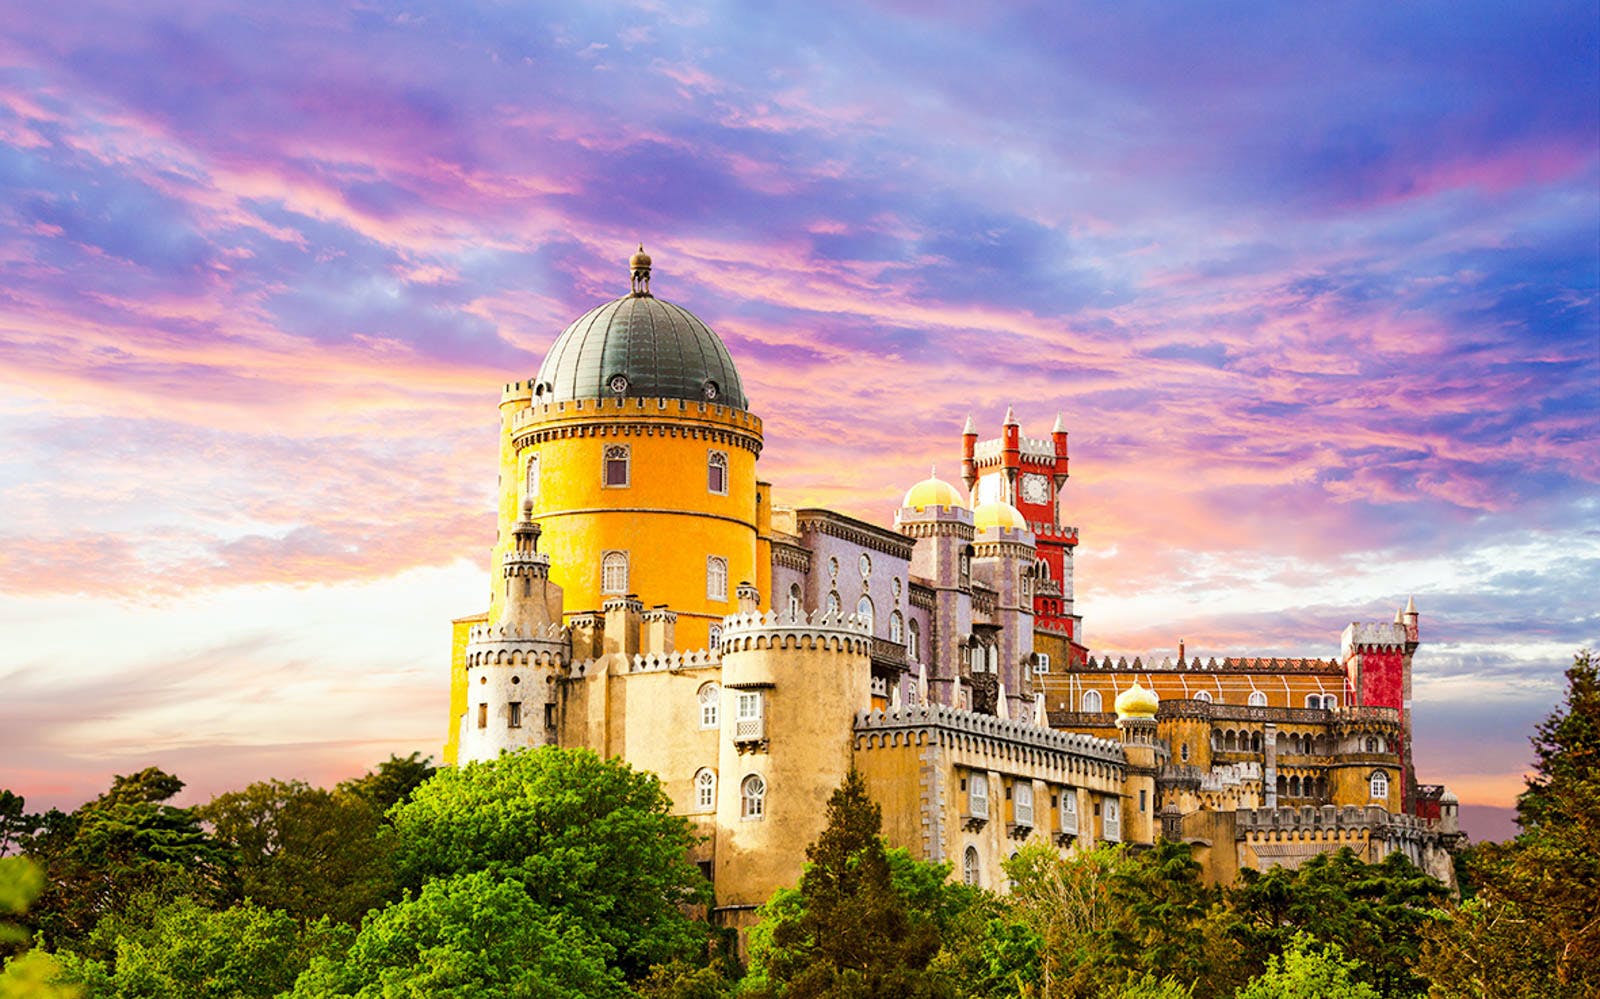 It’s That Easy — Score Big on This 30-Question ‘Round the World Quiz to Win National Palace of Pena, Sintra, Portugal